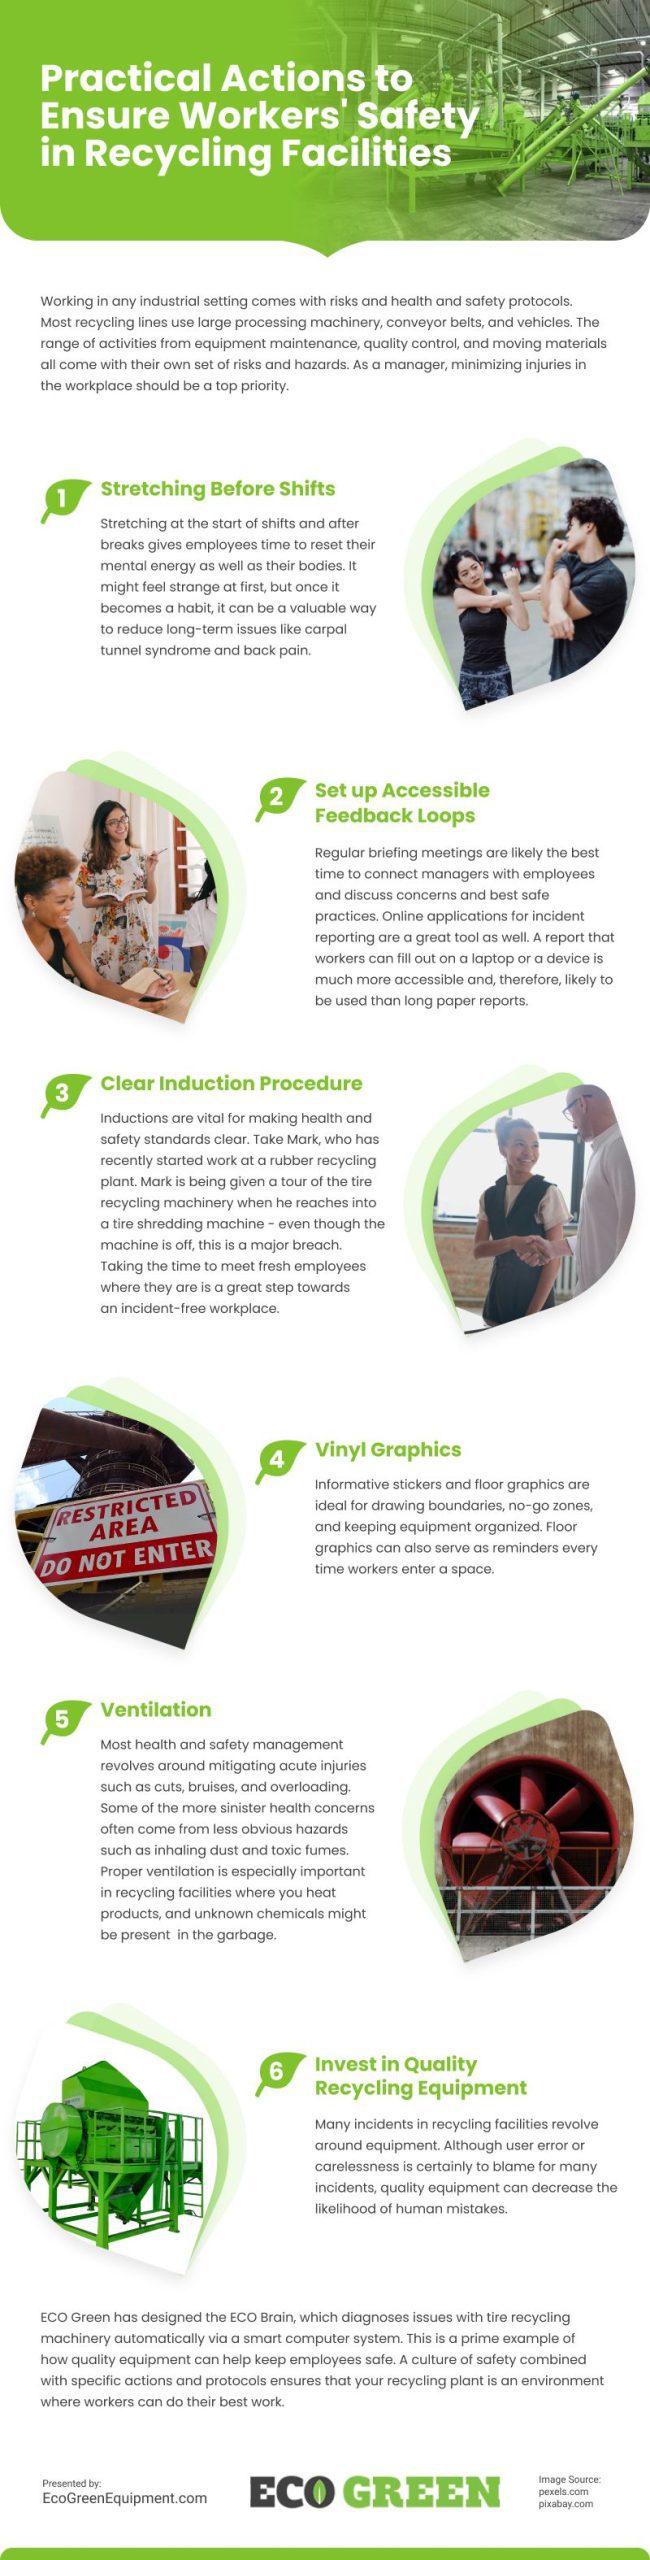 Practical Actions to Ensure Workers' Safety in Recycling Facilities Infographic